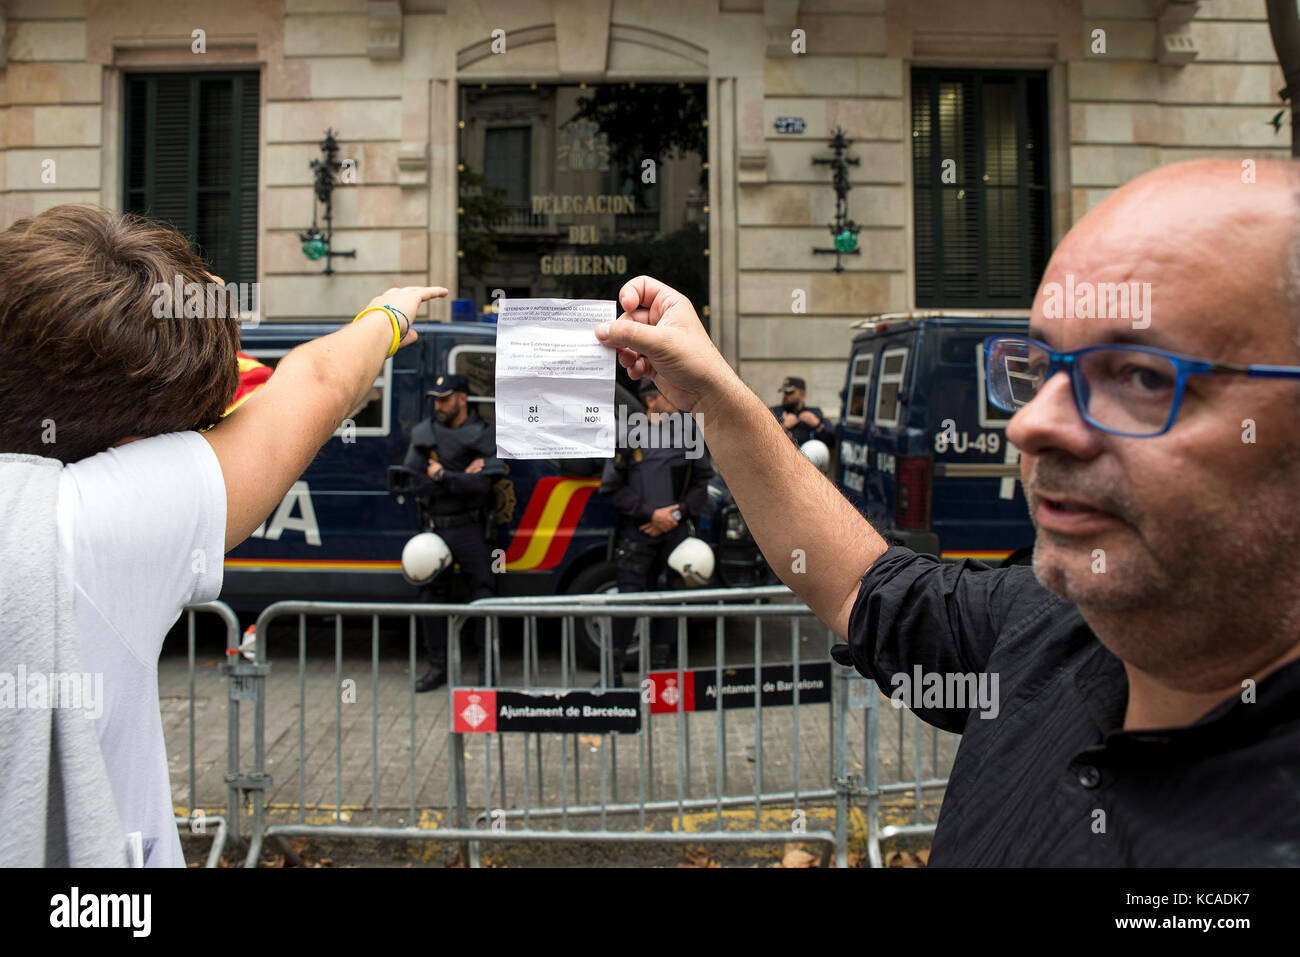 Barcelona, Spain. 3rd Oct, 2017. Supporters of Catalan independence protesting outside a Spanish government building in Barcelona, Spain, 3 October 2017. Unions and other organisations called a general strike in Catalonia for Tuesday in protest against police action during the independence referendum on Sunday. Credit: Nicolas Carvalho Ochoa/dpa/Alamy Live News Stock Photo